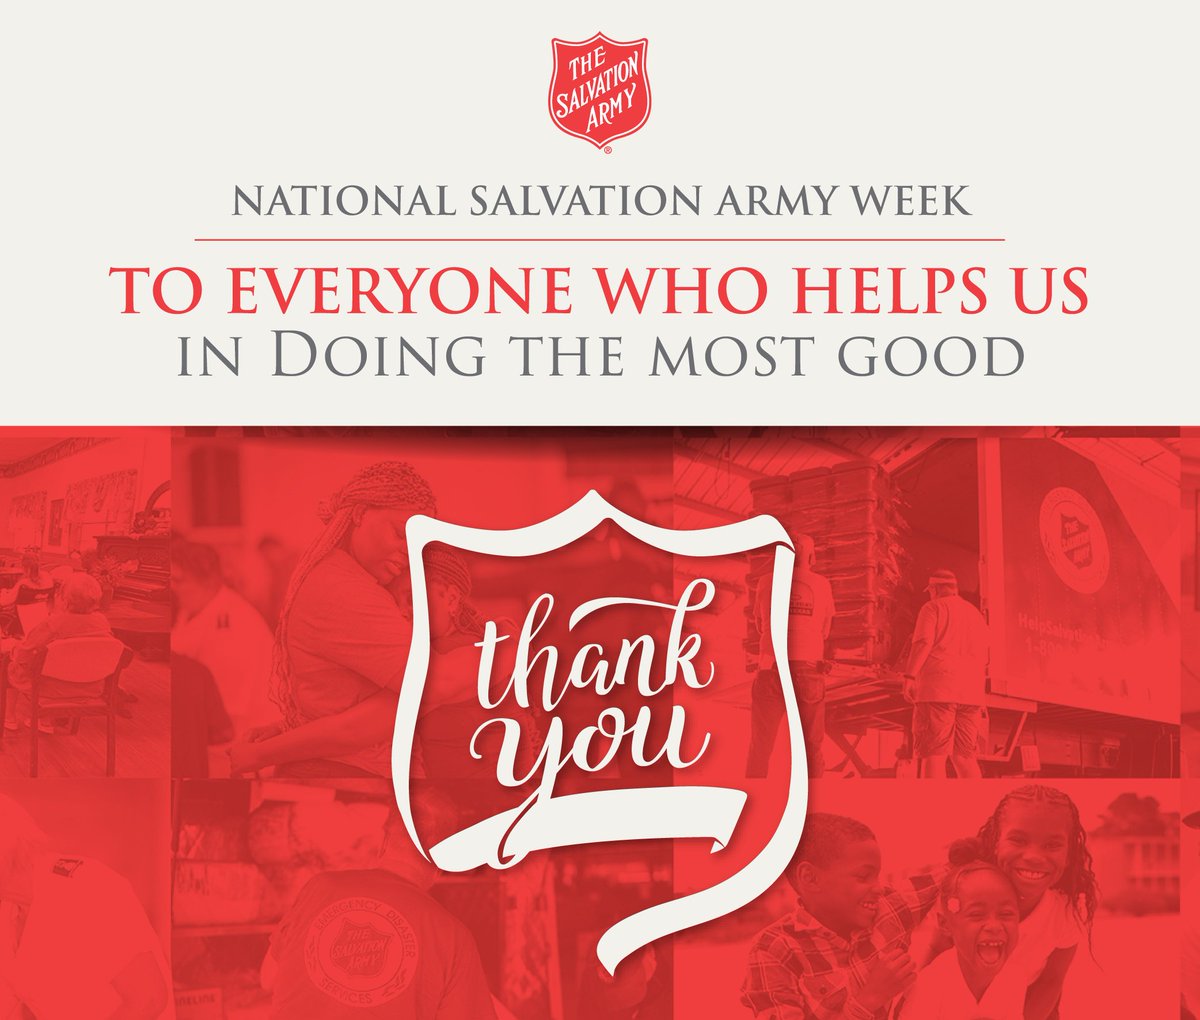 National Salvation Army Week is here. The Salvation Army, with your support, is dedicated to continuing our #mission of #preaching the #gospel of Jesus Christ and meeting human needs in His name without discrimination.